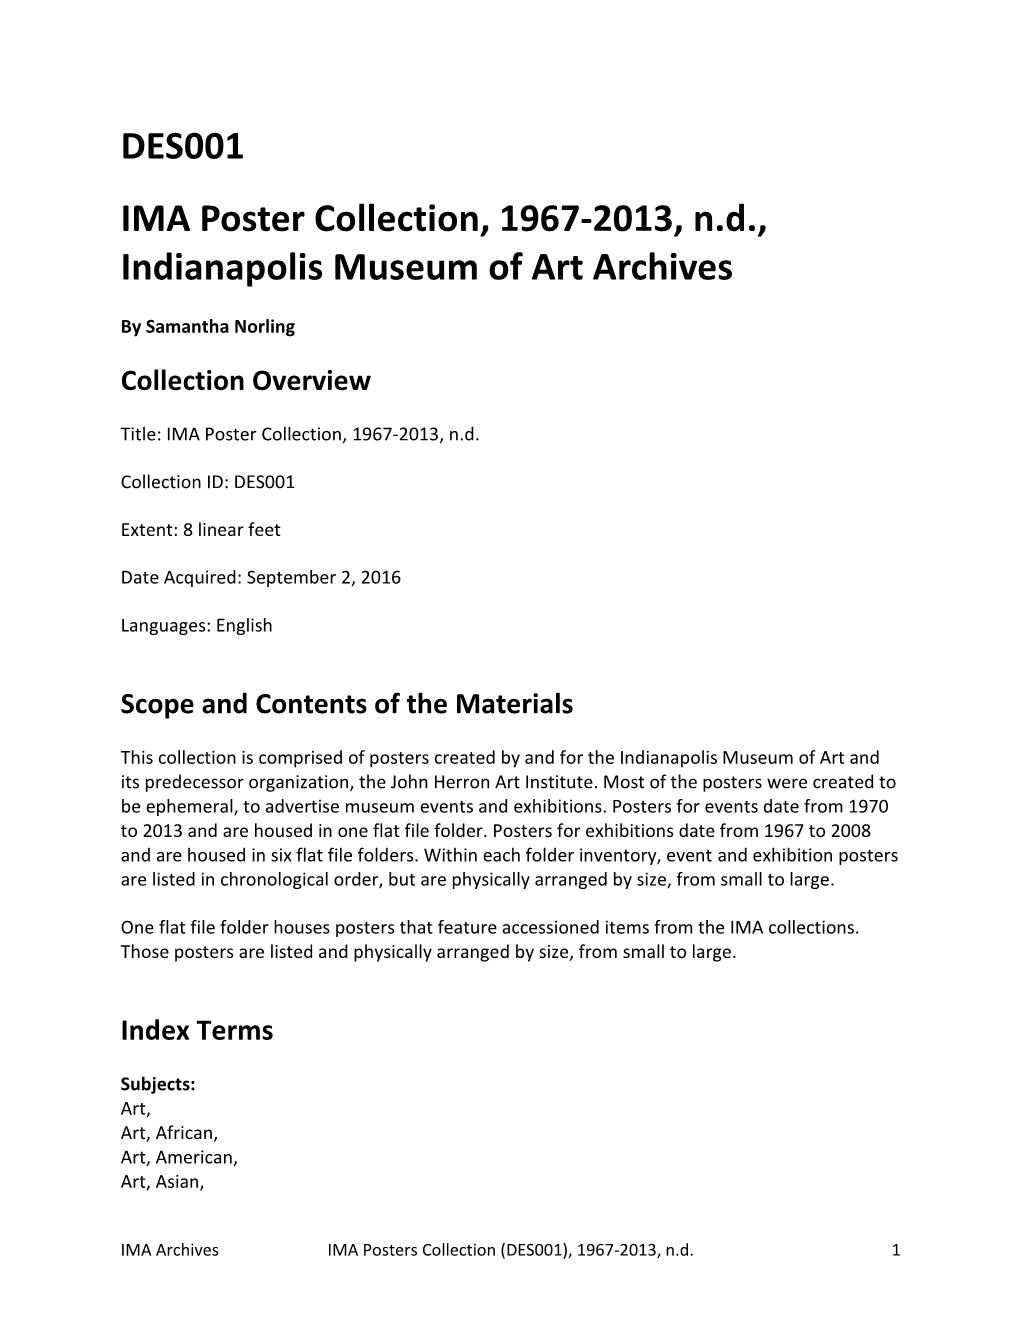 IMA Poster Collection, 1967-2013, N.D., Indianapolis Museum of Art Archives